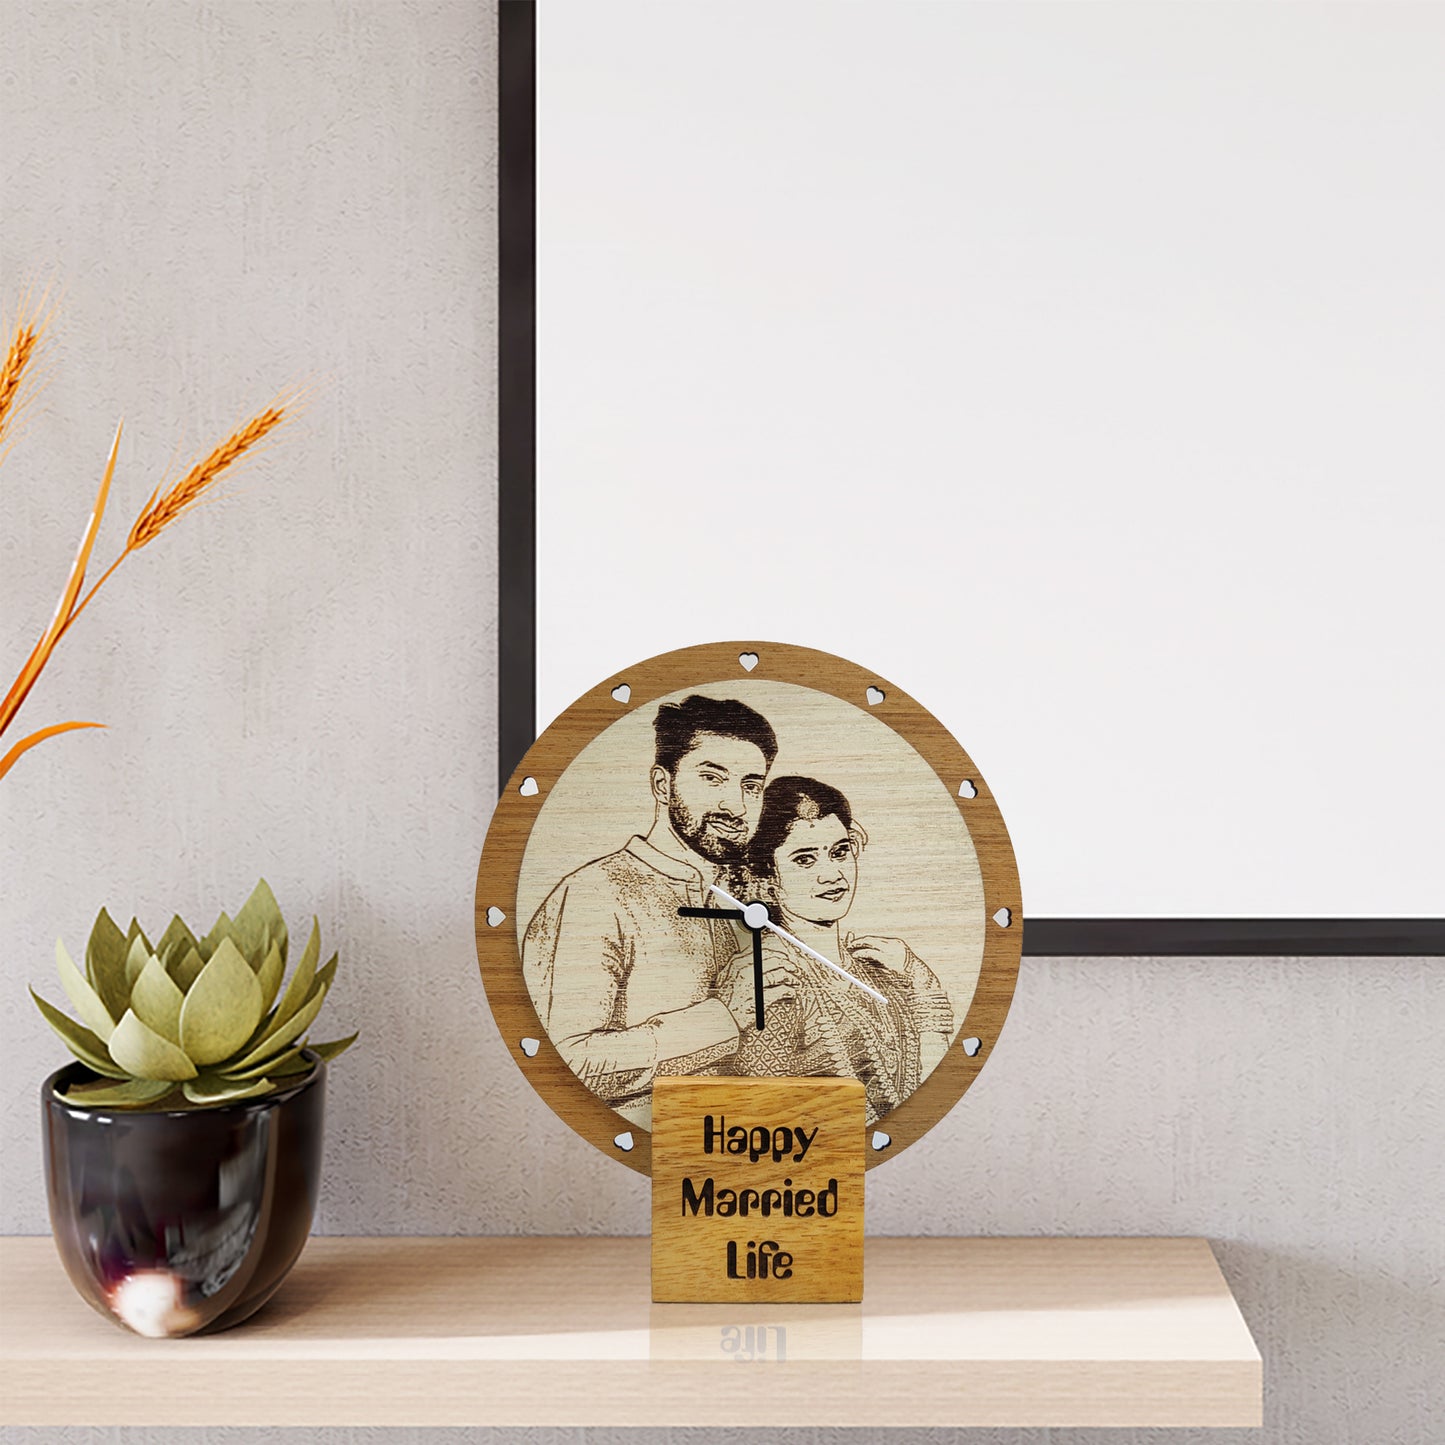 Personalize Photo Engraved Standee Clock Gift